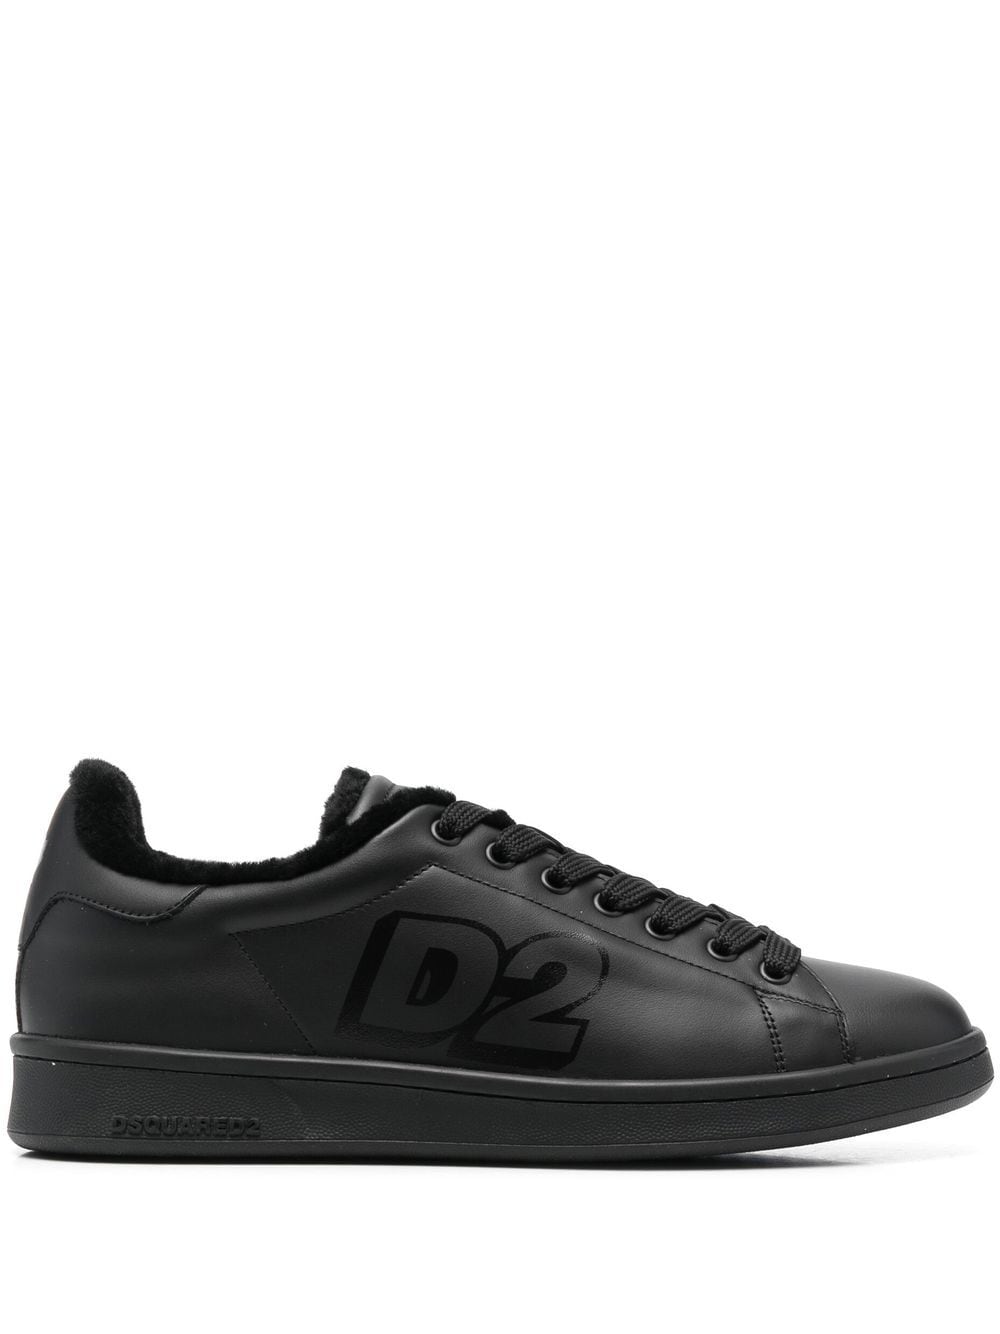 Dsquared2 lace-up low-top sneakers - Black von Dsquared2